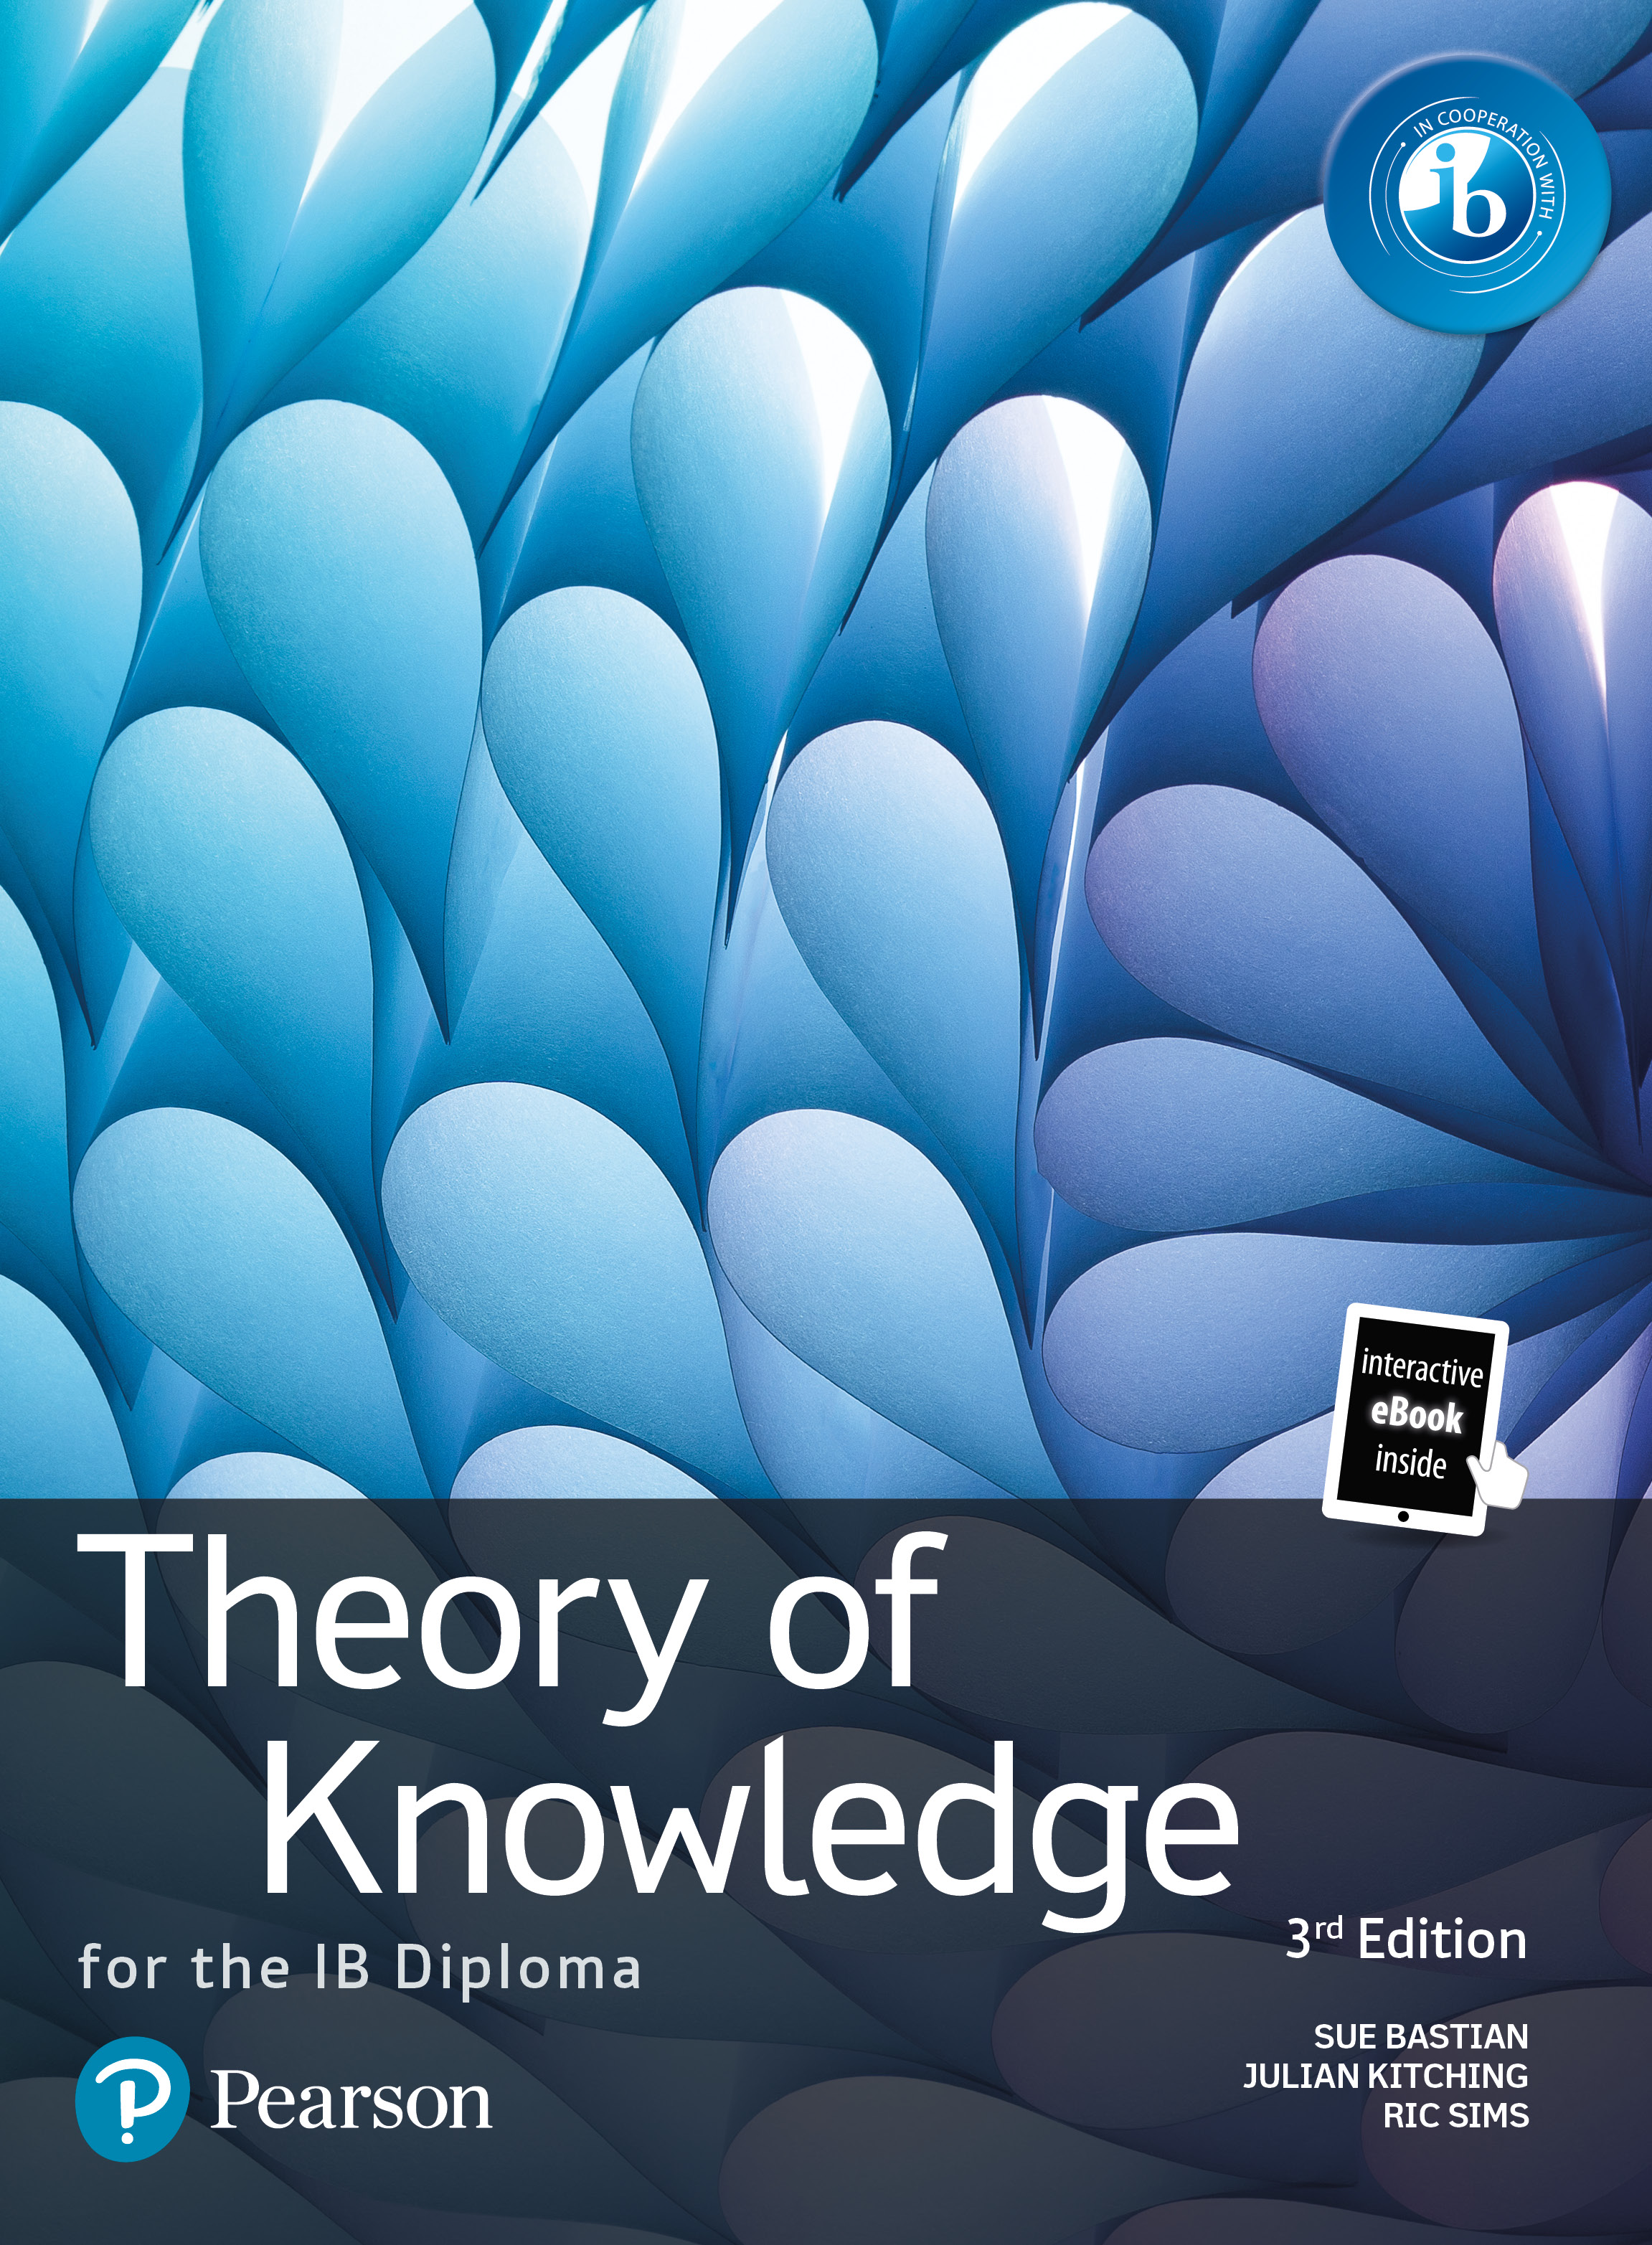 IB Diploma Theory of Knowledge book cover